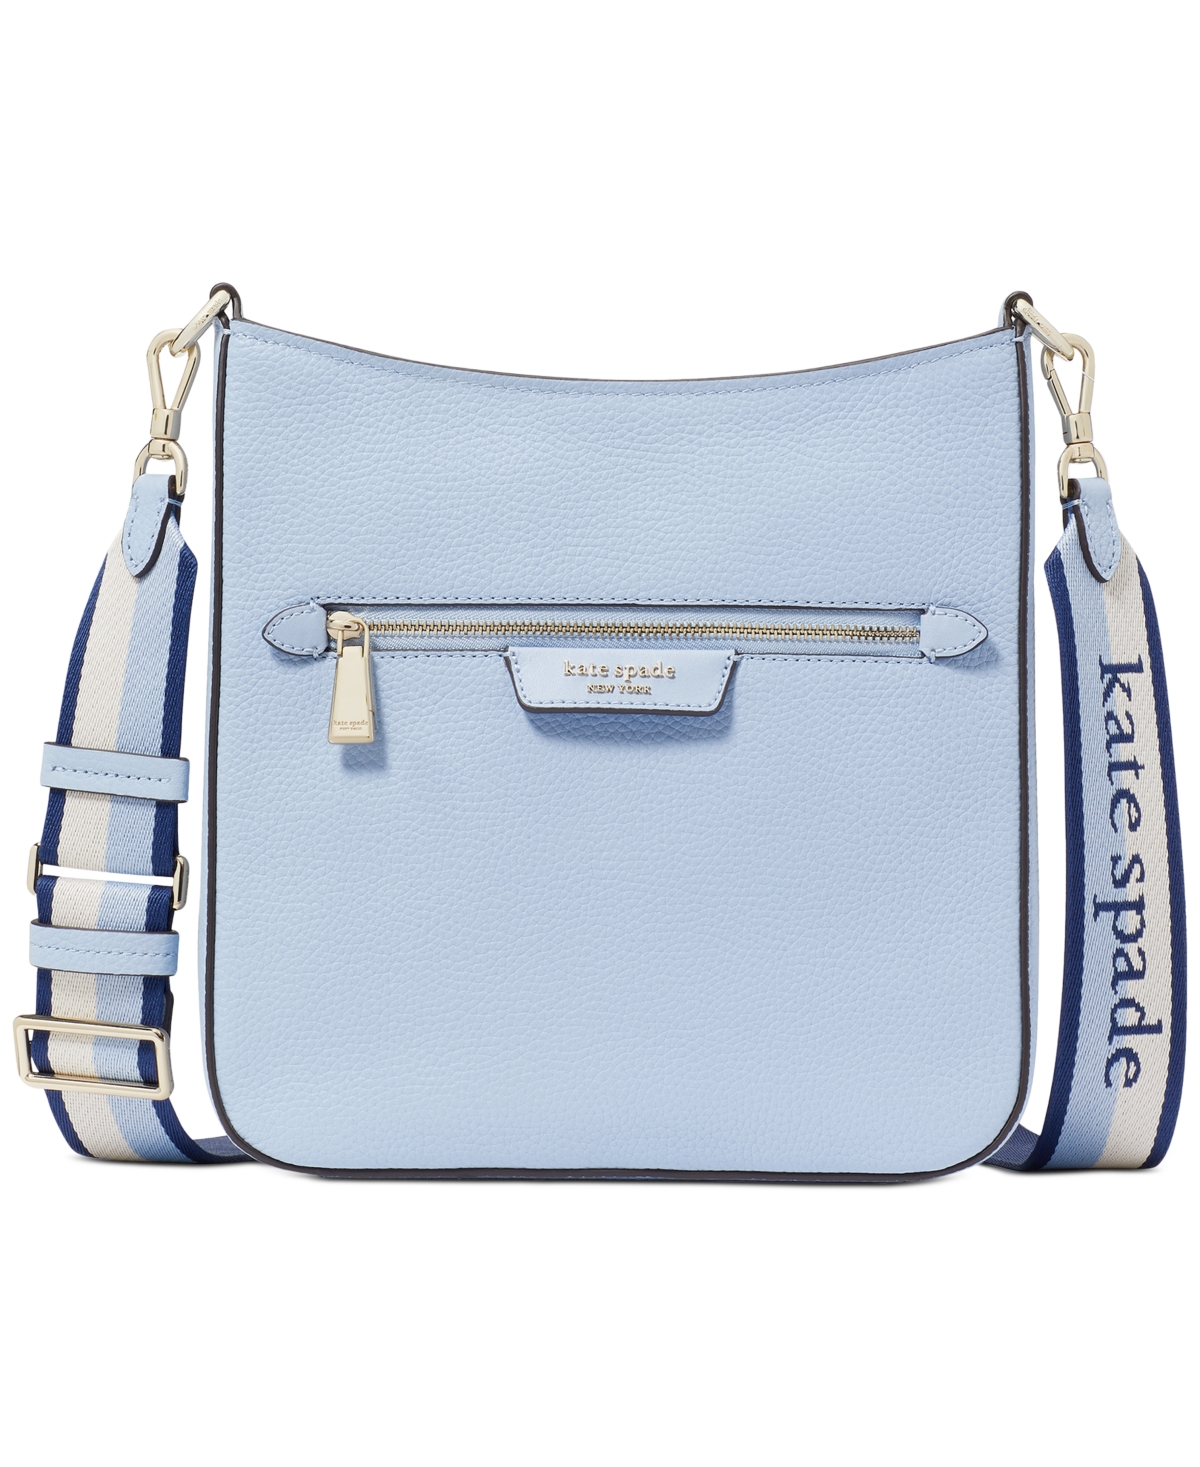 Kate Spade Hudson Small Pebbled Leather Messenger Crossbody In North Star